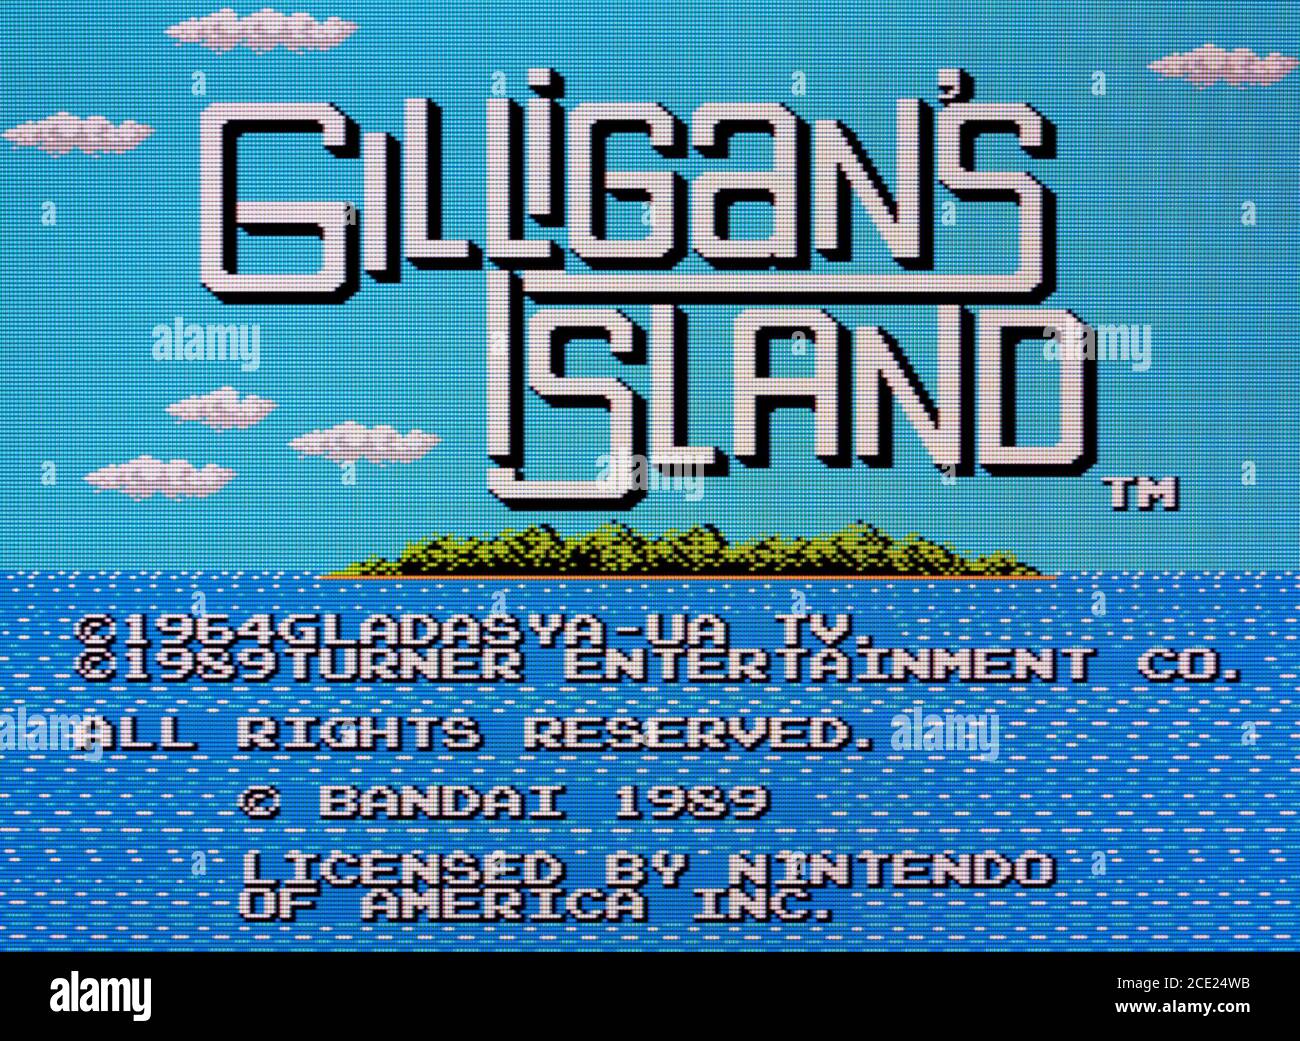 Gilligan's Island - Nintendo Entertainment System - NES Videogame - Editorial use only Stock Photo